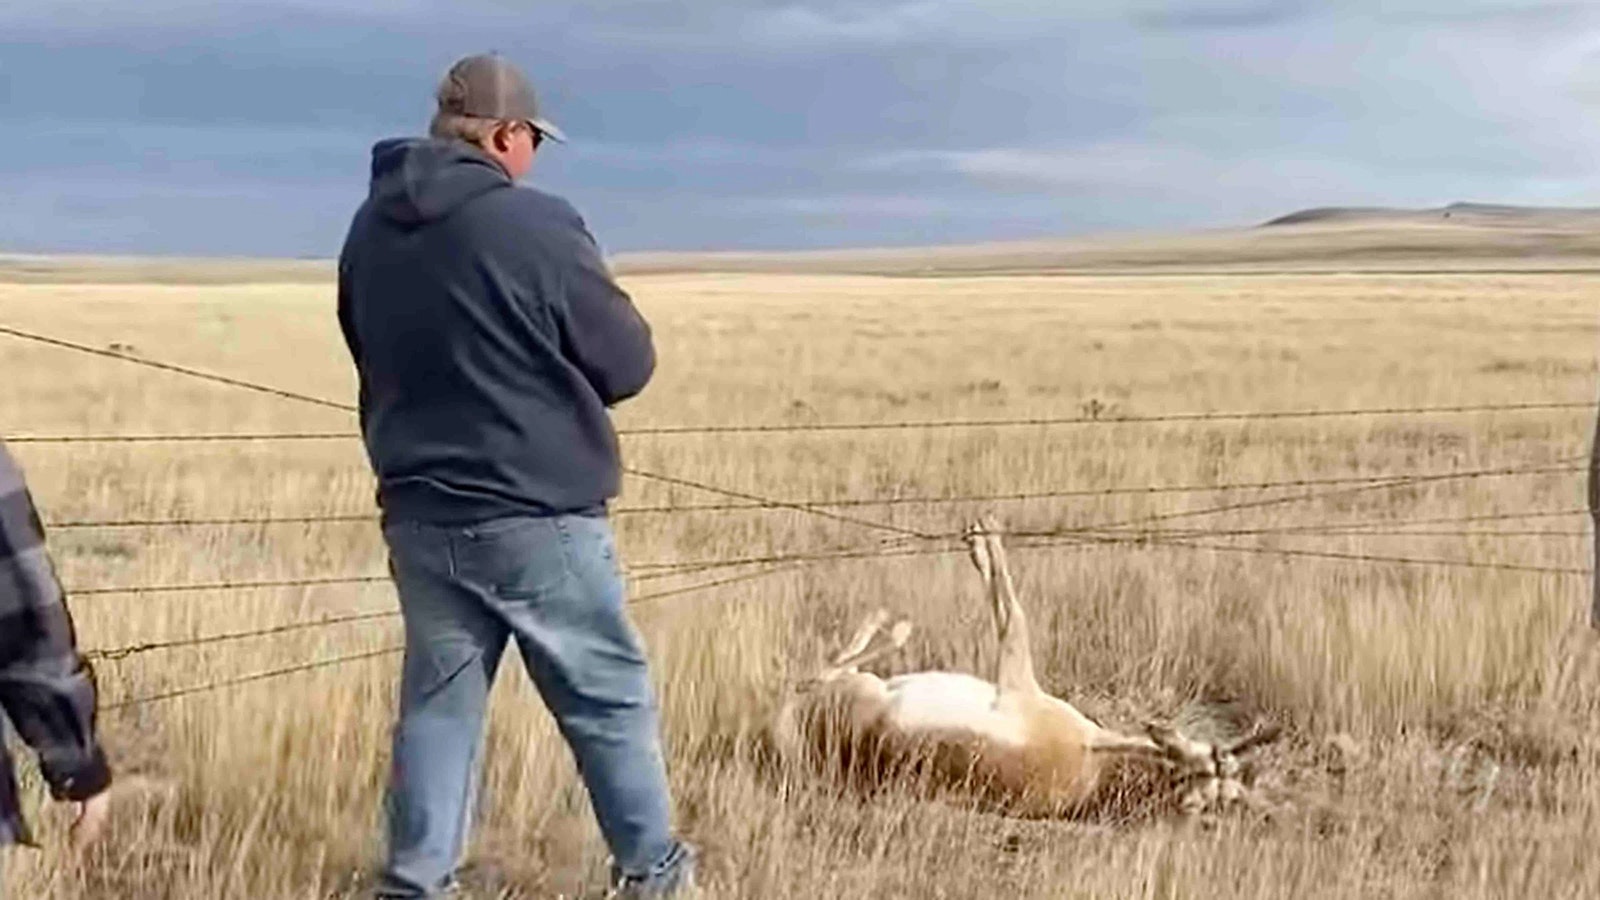 Antelope caught in fence 11 18 23